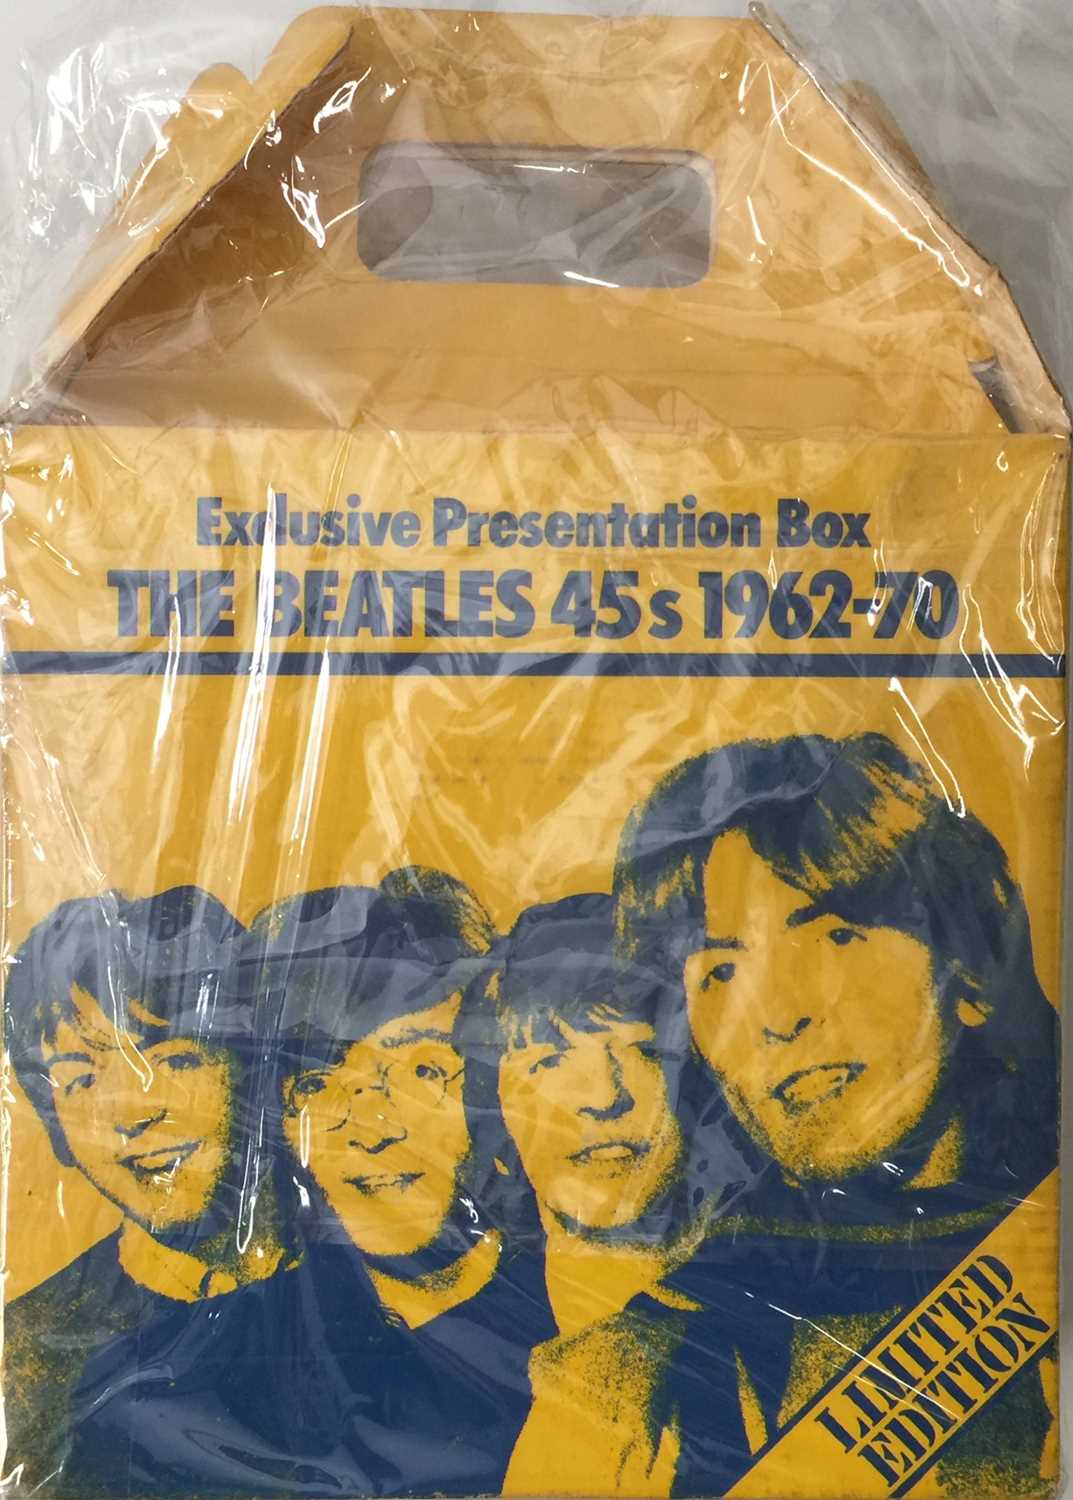 Lot 98 - THE BEATLES - THE BEATLES 45s 1962-70 (PROMOTIONAL 'YELLOW BOX' SET)